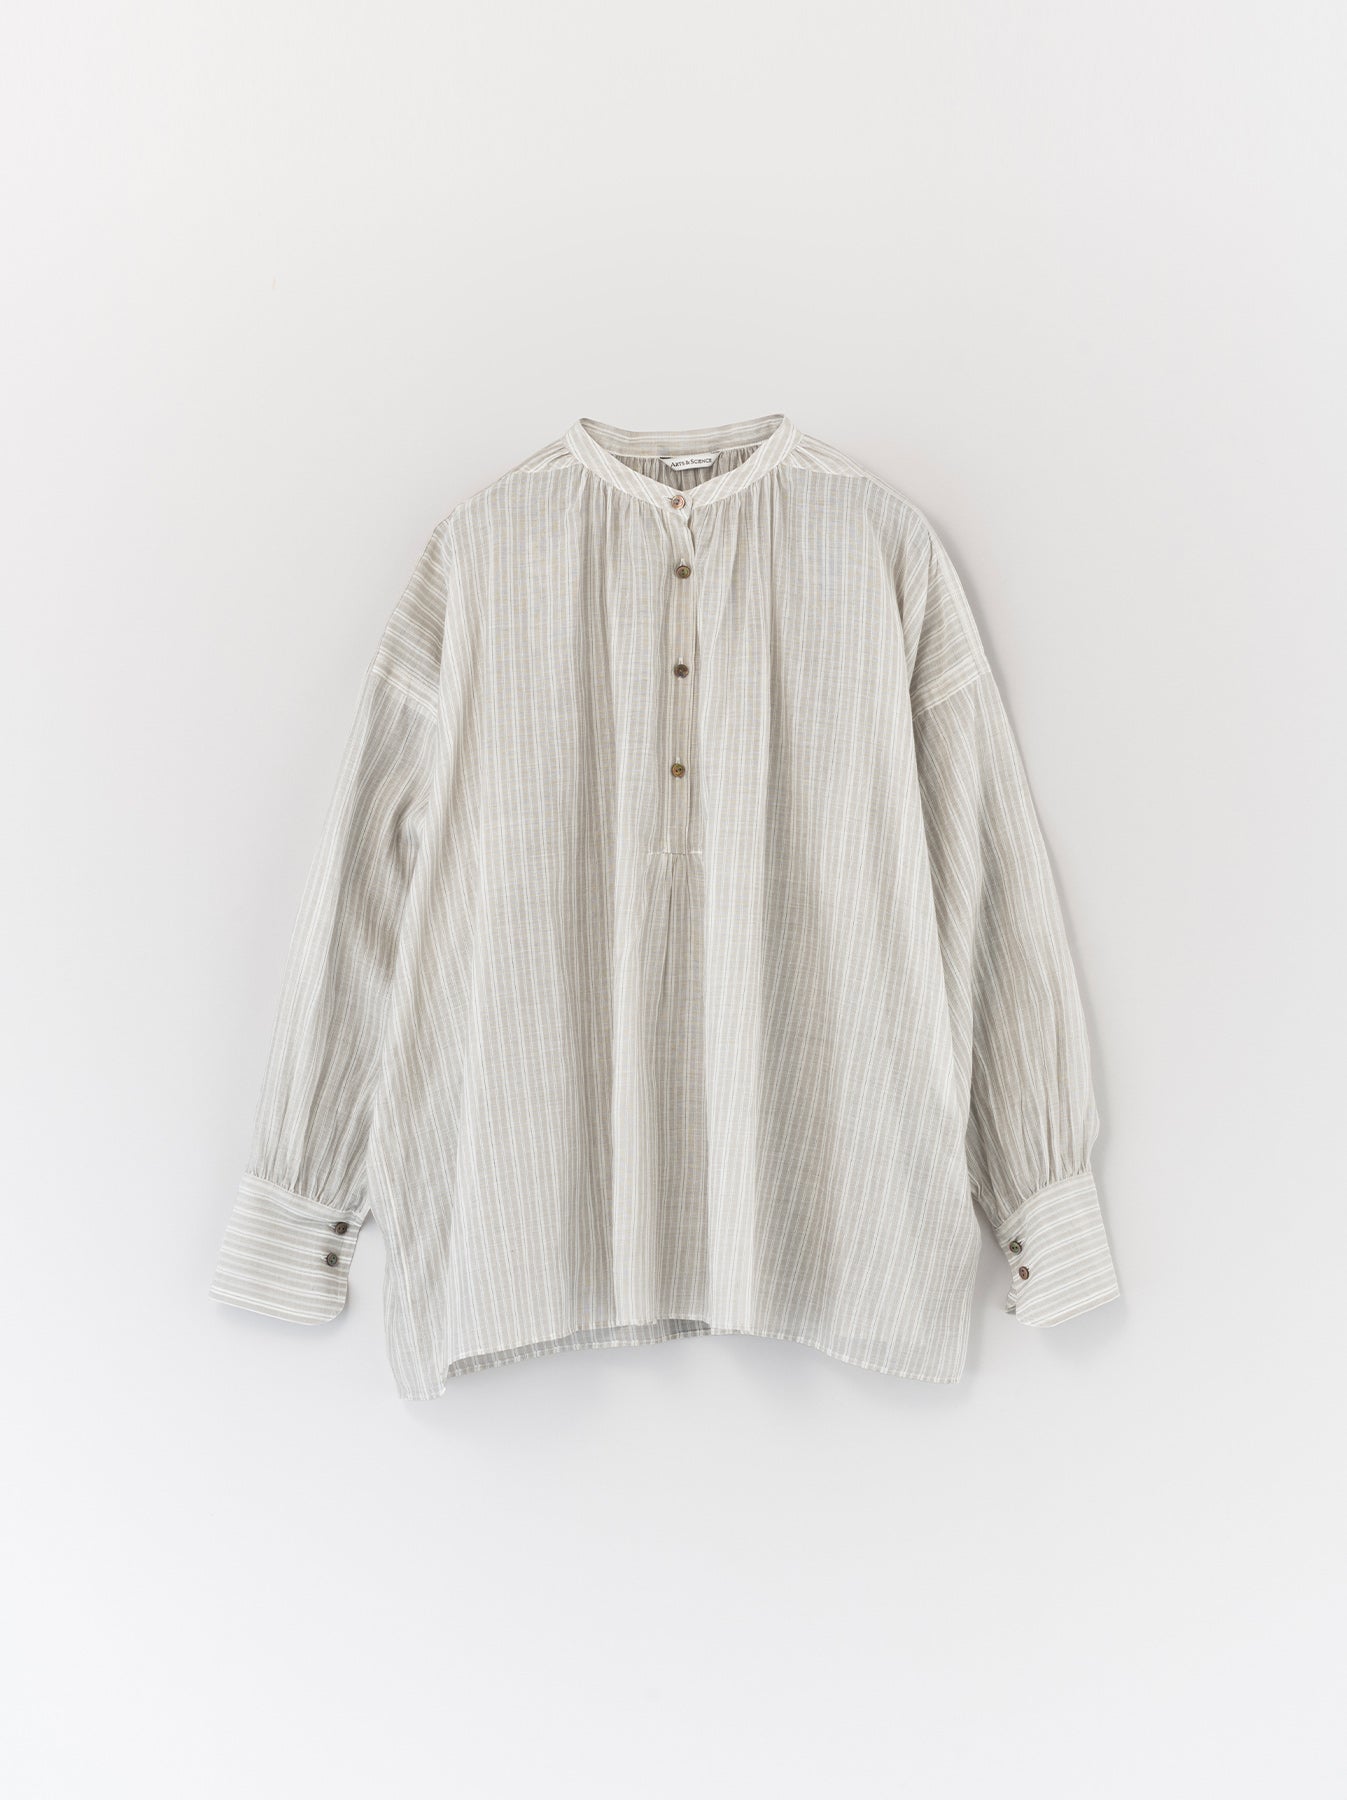 【23SS】 ARTS&SCIENCE new gather blouse